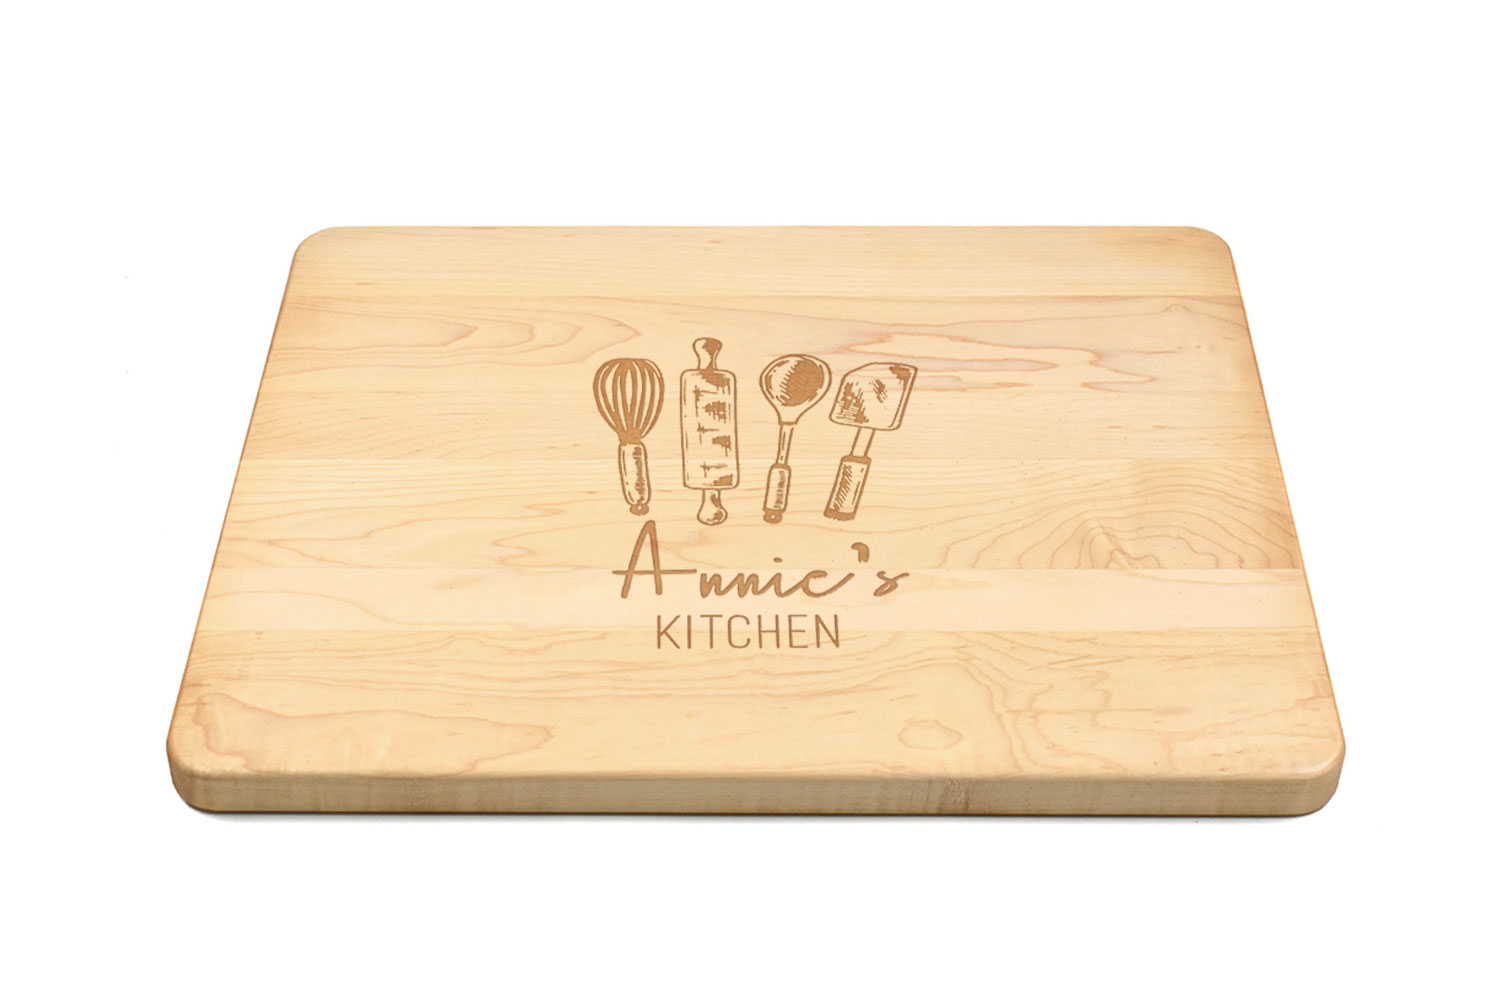 Cutting board rounded corners & edges